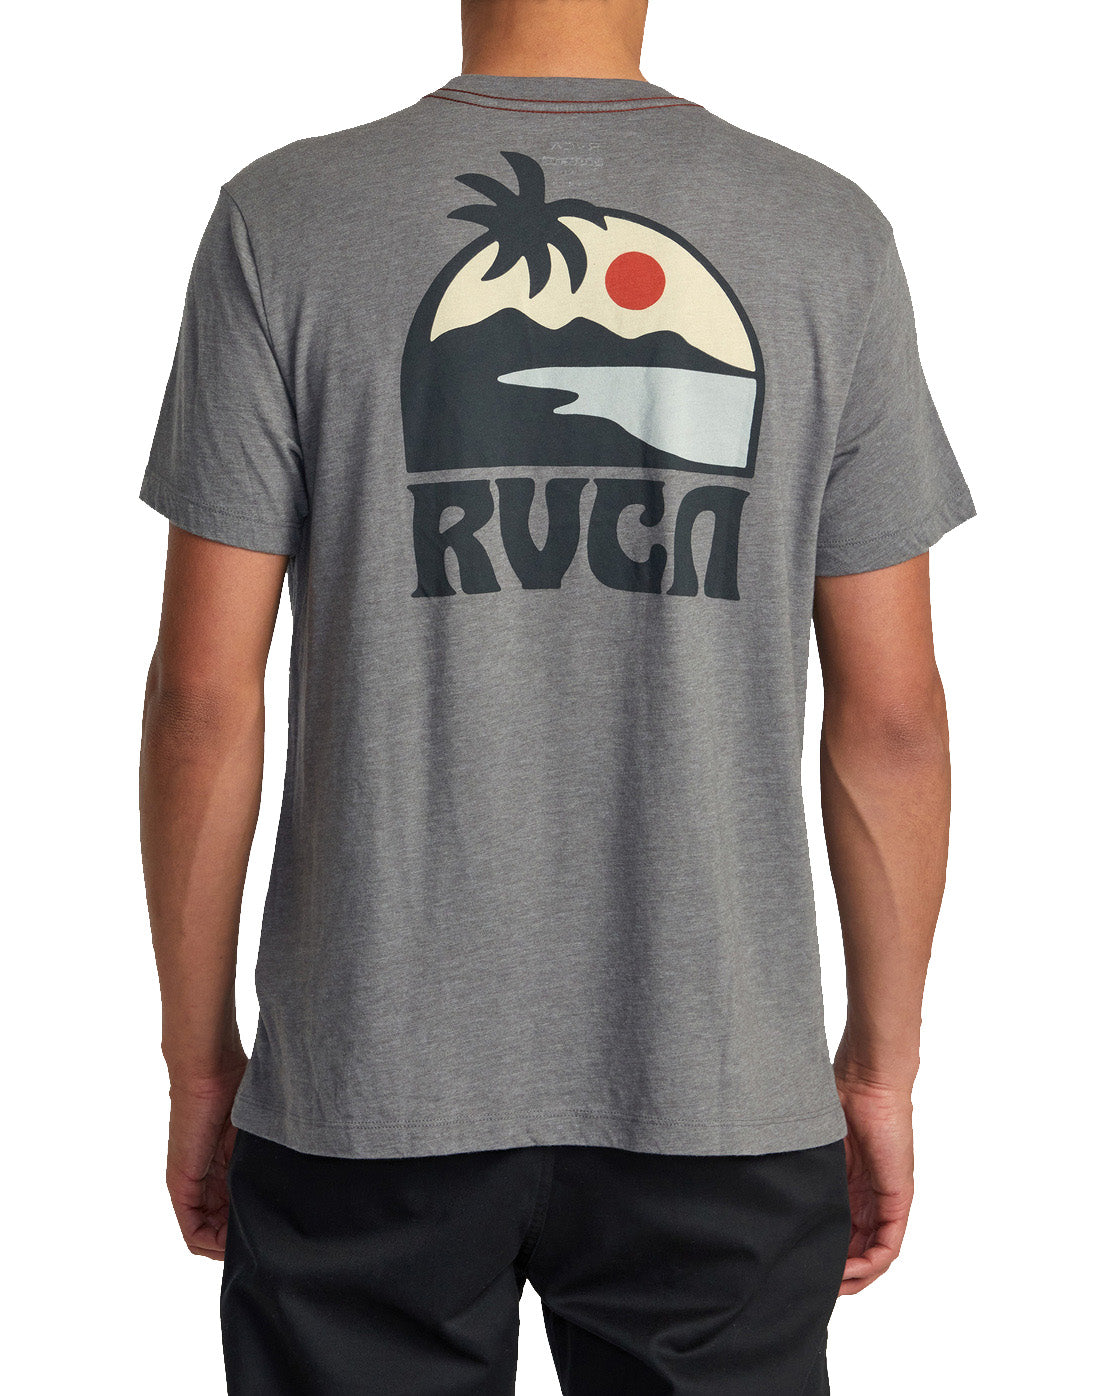 RVCA SUNDWOWNER M TEES SMK S